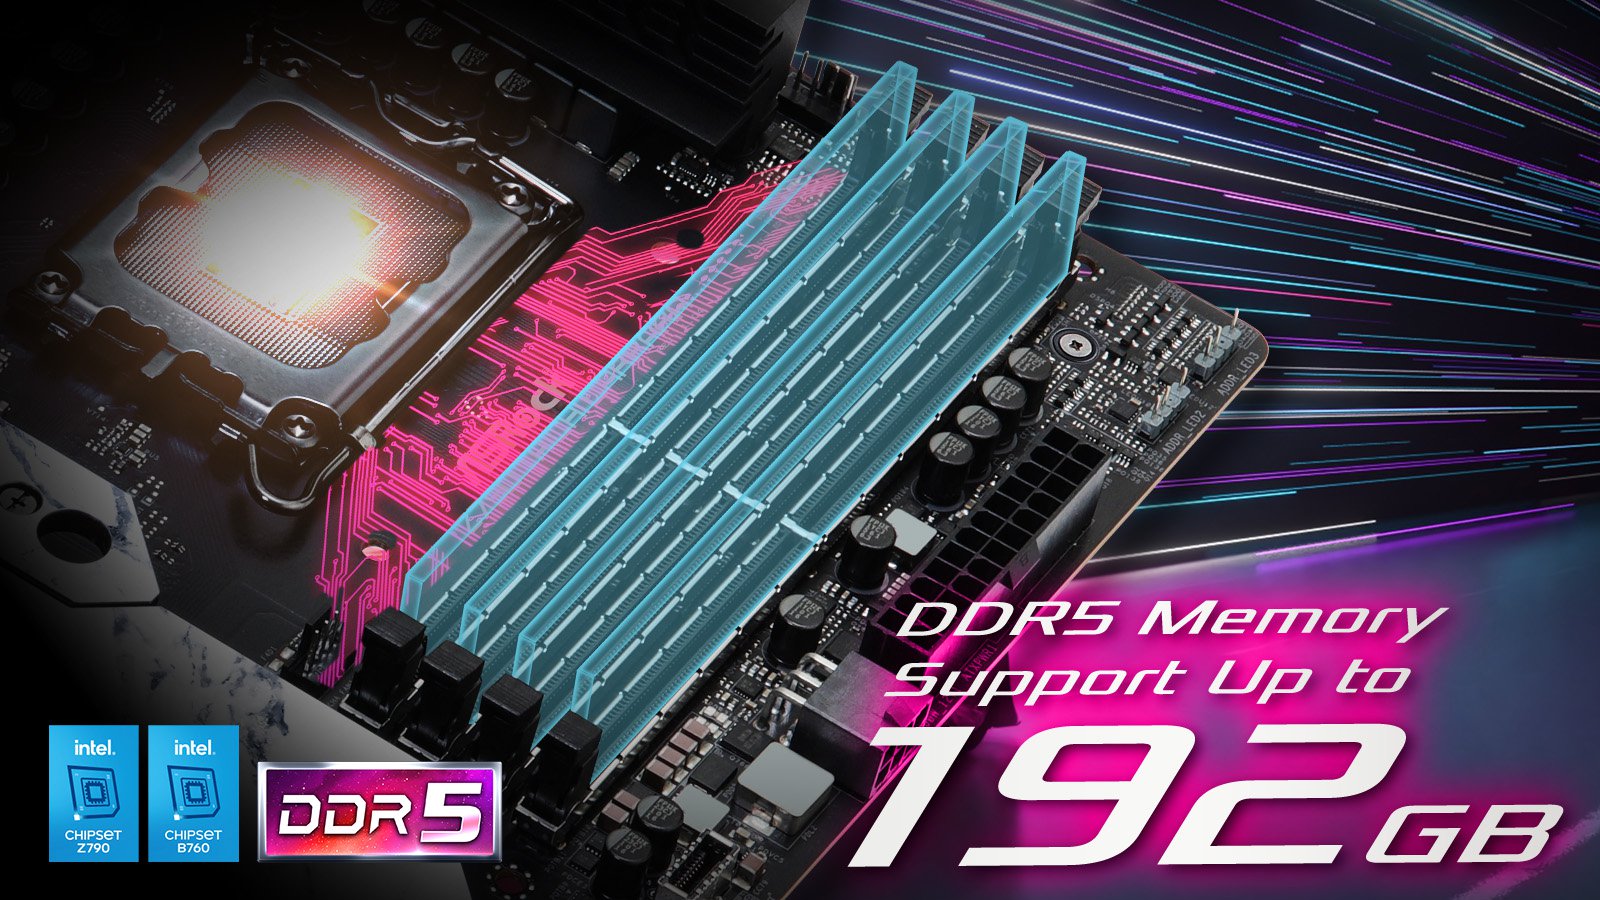 ASRock Intel<sup>®</sup> 700/600 Series Motherboards Now Support Memory Capacity up to 192GB!